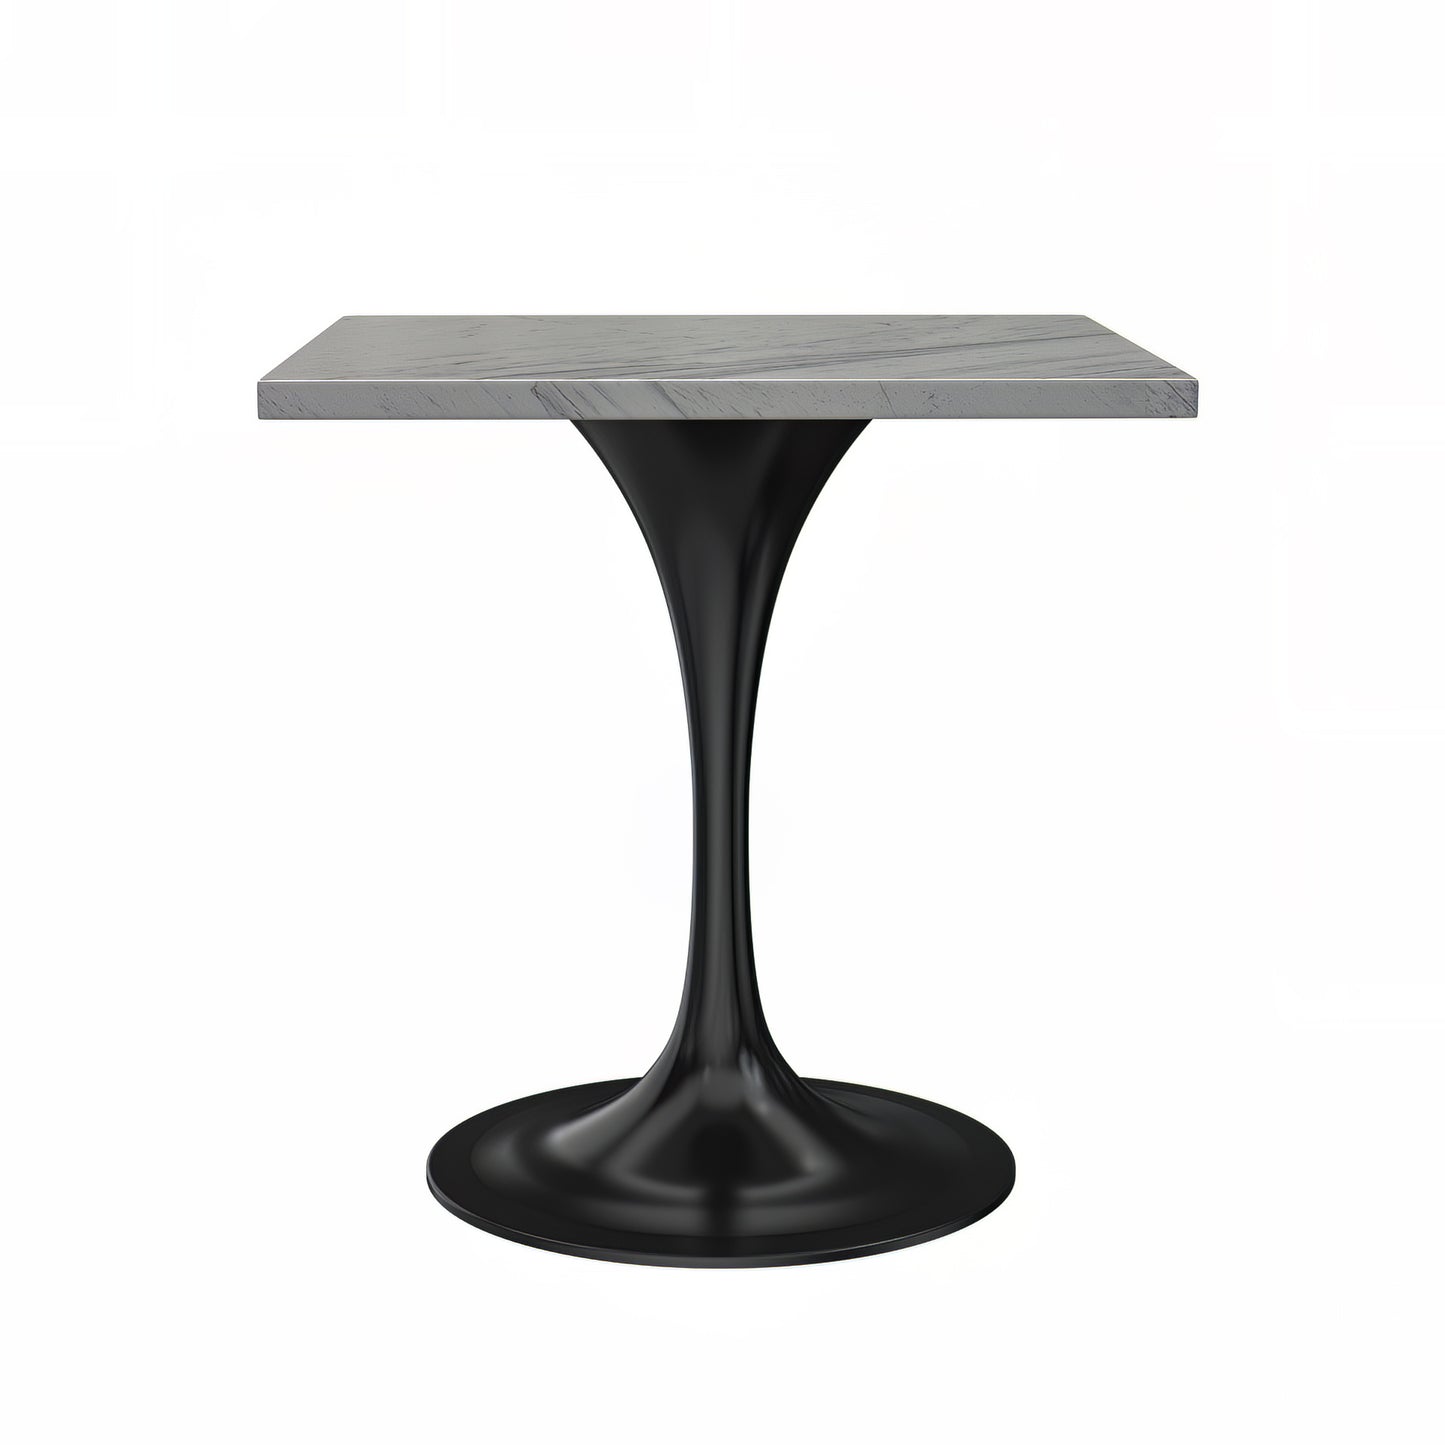 Vera 27" Square Dining Table - Black Base Marbleized Top